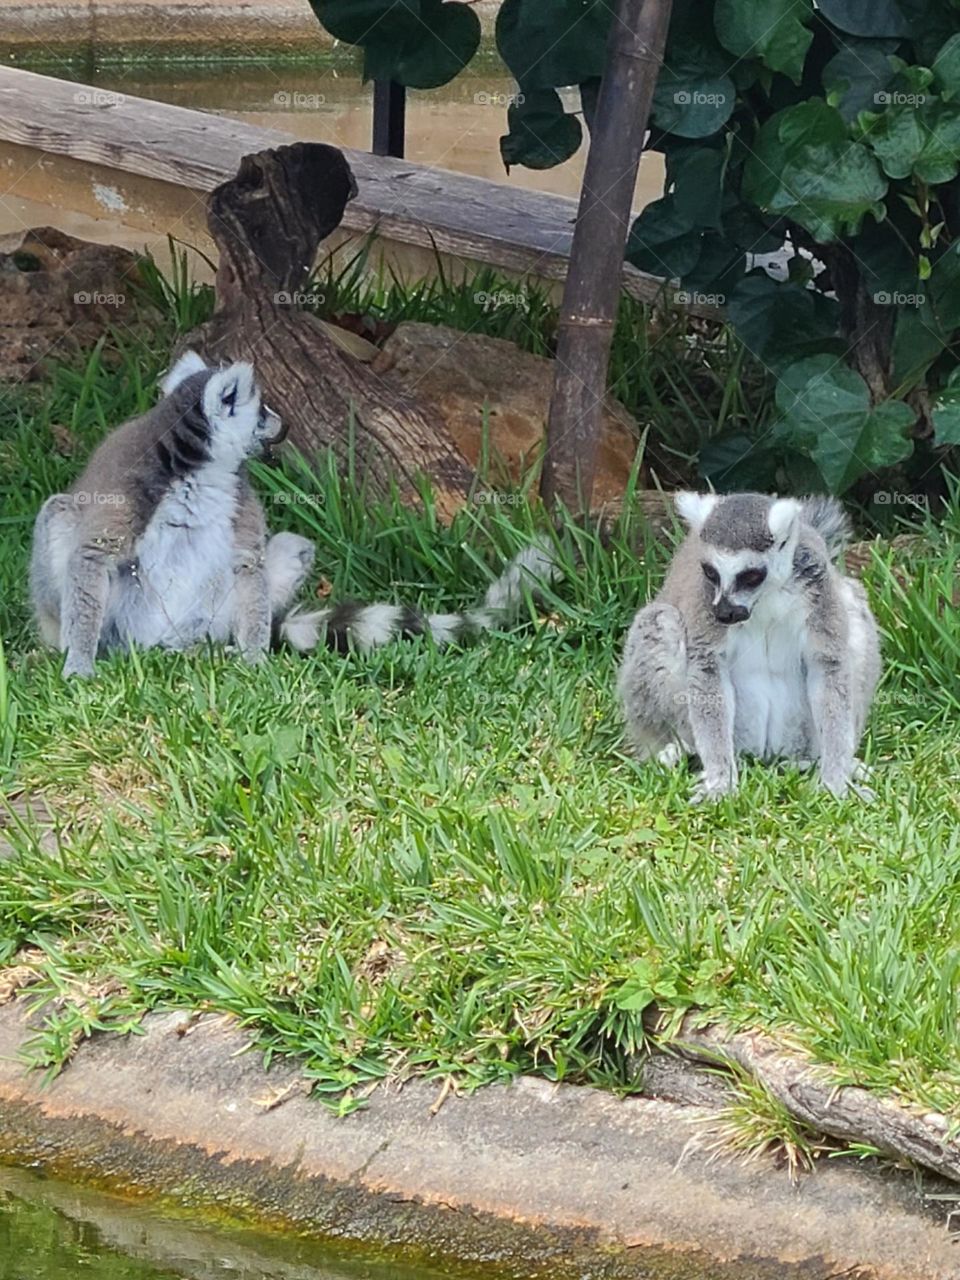 lemurs in the grass in hawaii at the zoo